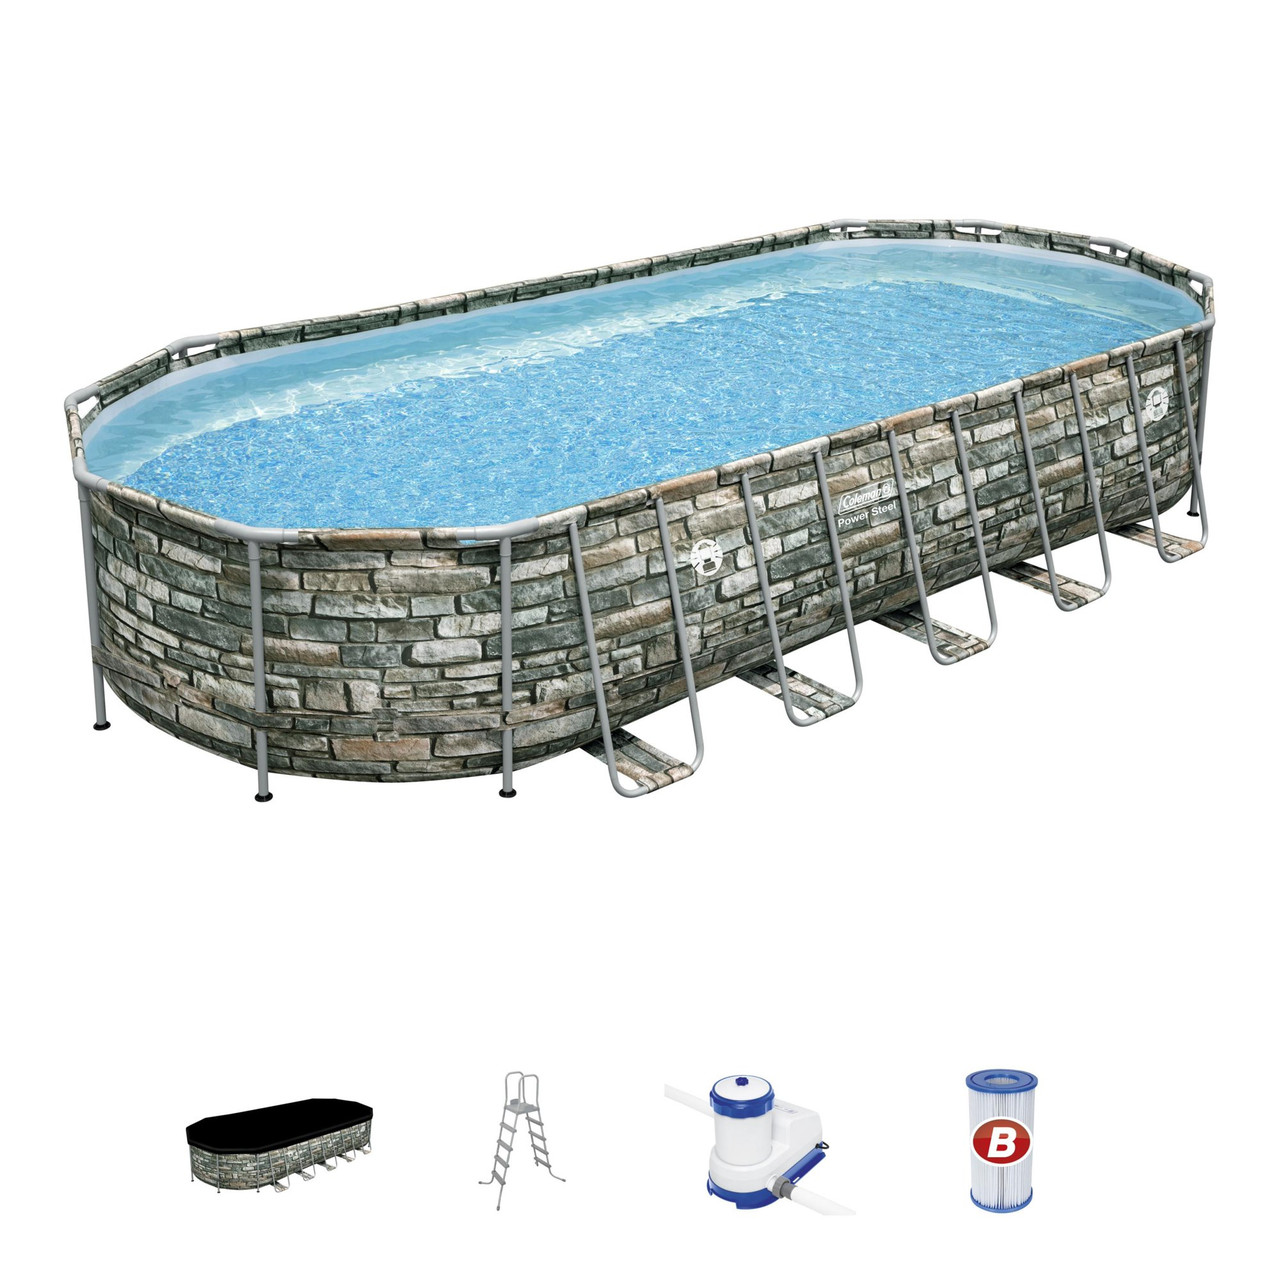 Coleman Power Steel 26' x 52" Deluxe Series Above Ground Pool Set with Wi-Fi Pump, Ladder and Cover